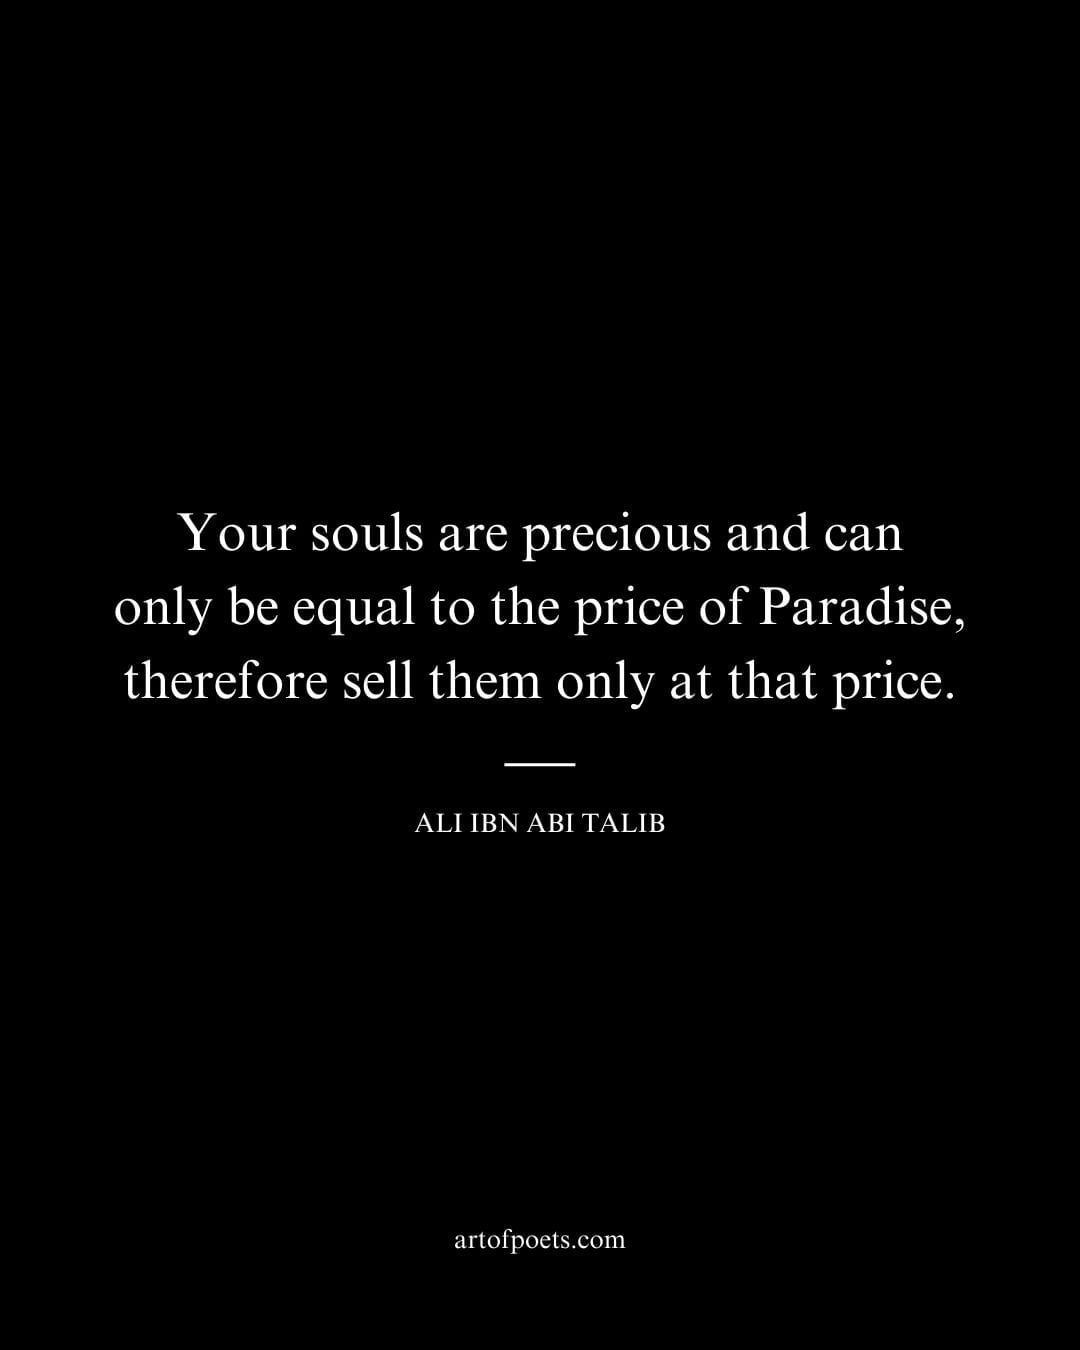 Your souls are precious and can only be equal to the price of Paradise therefore sell them only at that price